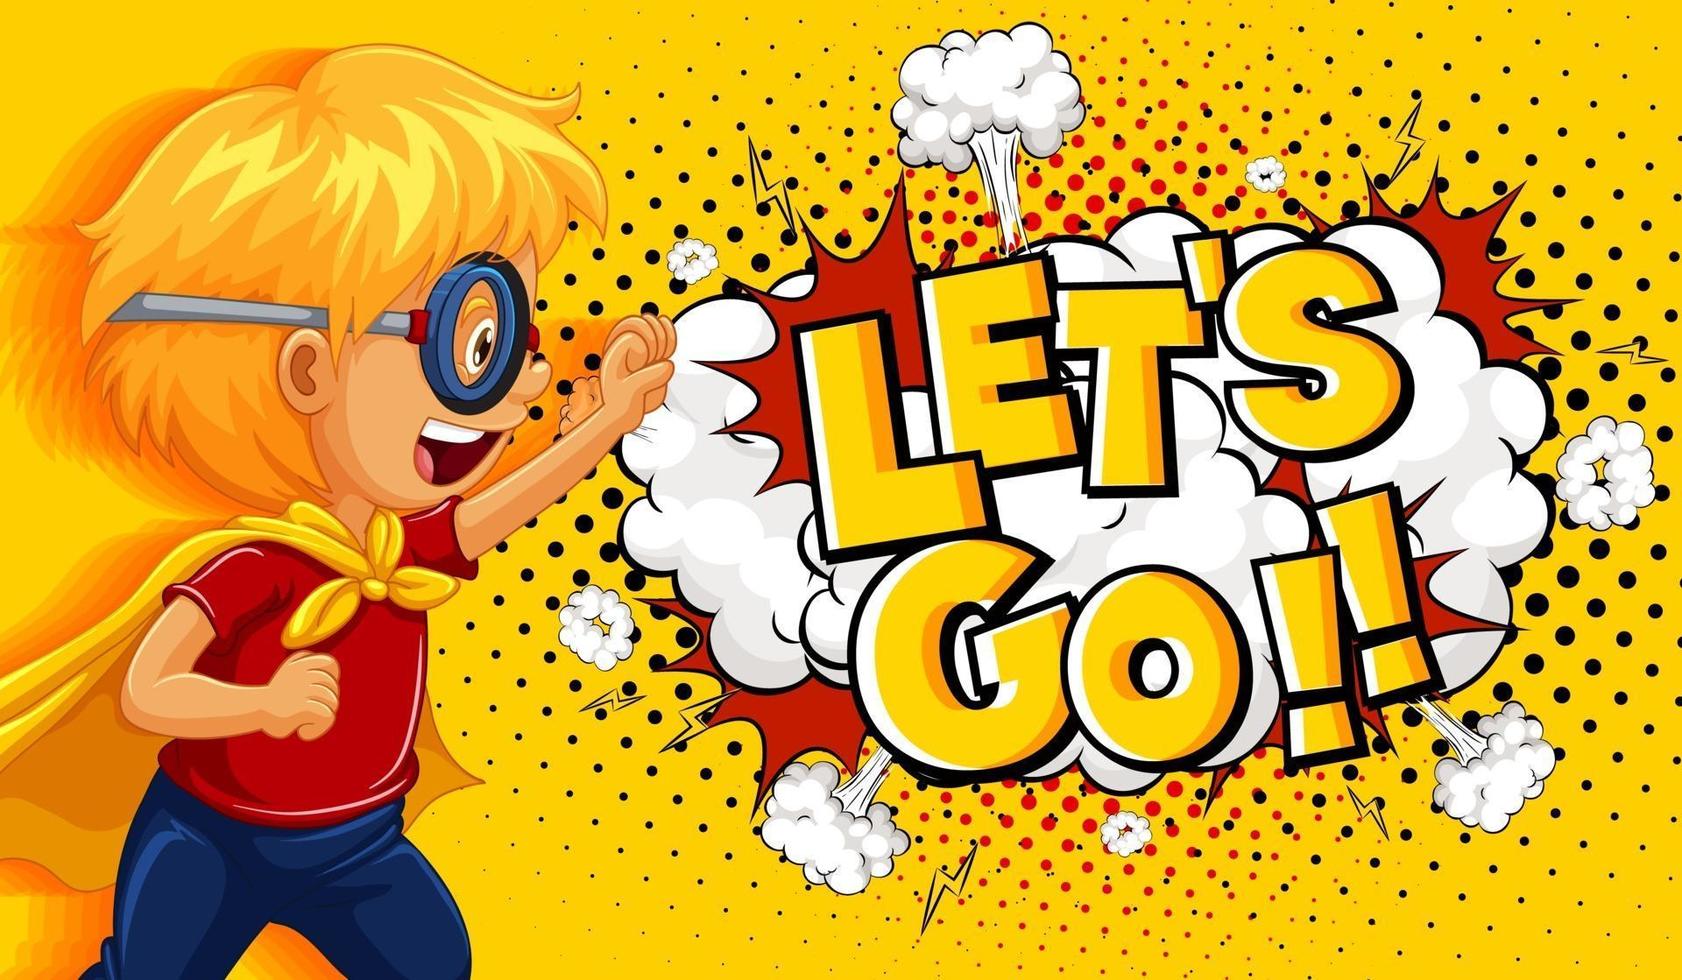 LET'S GO word on explosion background with boy cartoon character vector